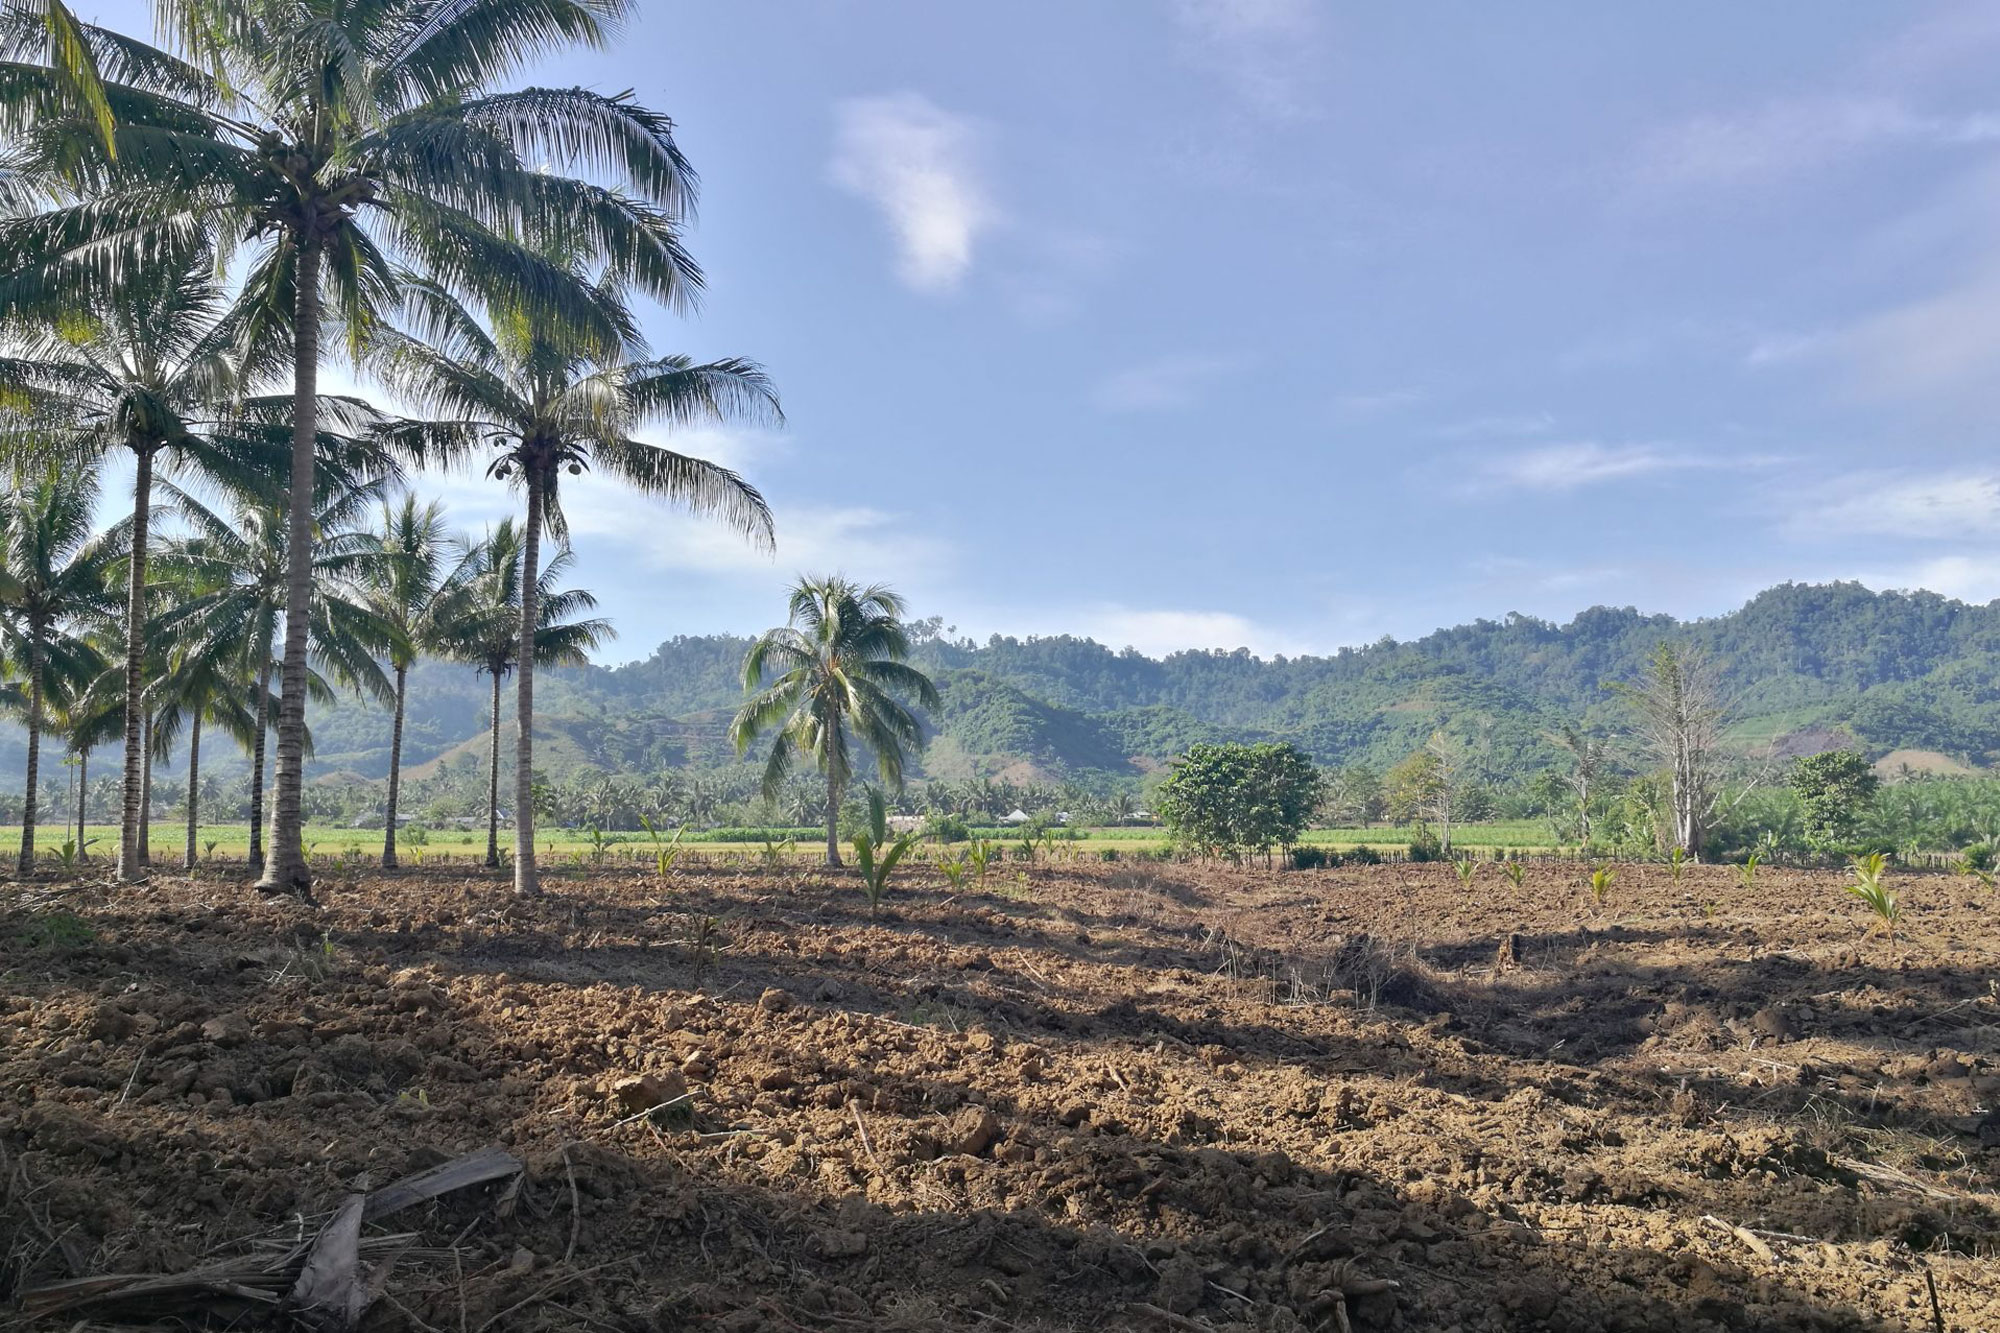 Area of deforested land to make coconut oil